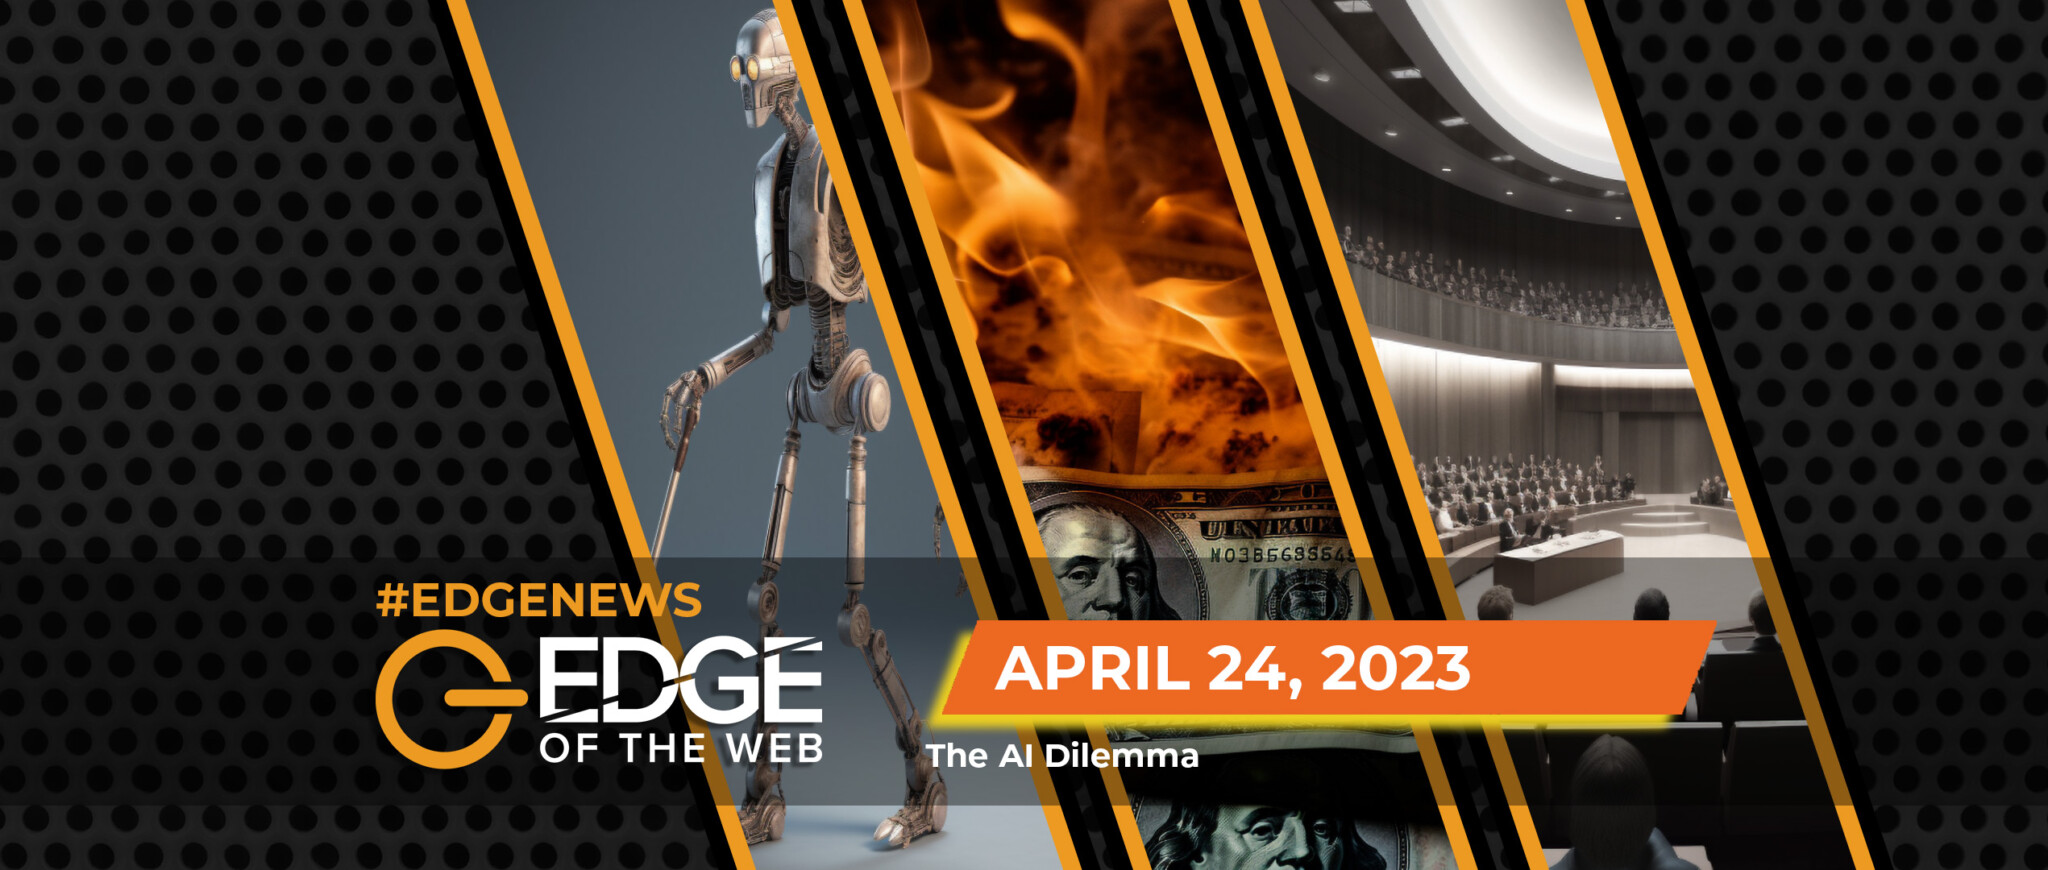 588 | News from the EDGE |  Week of 4.24.2023